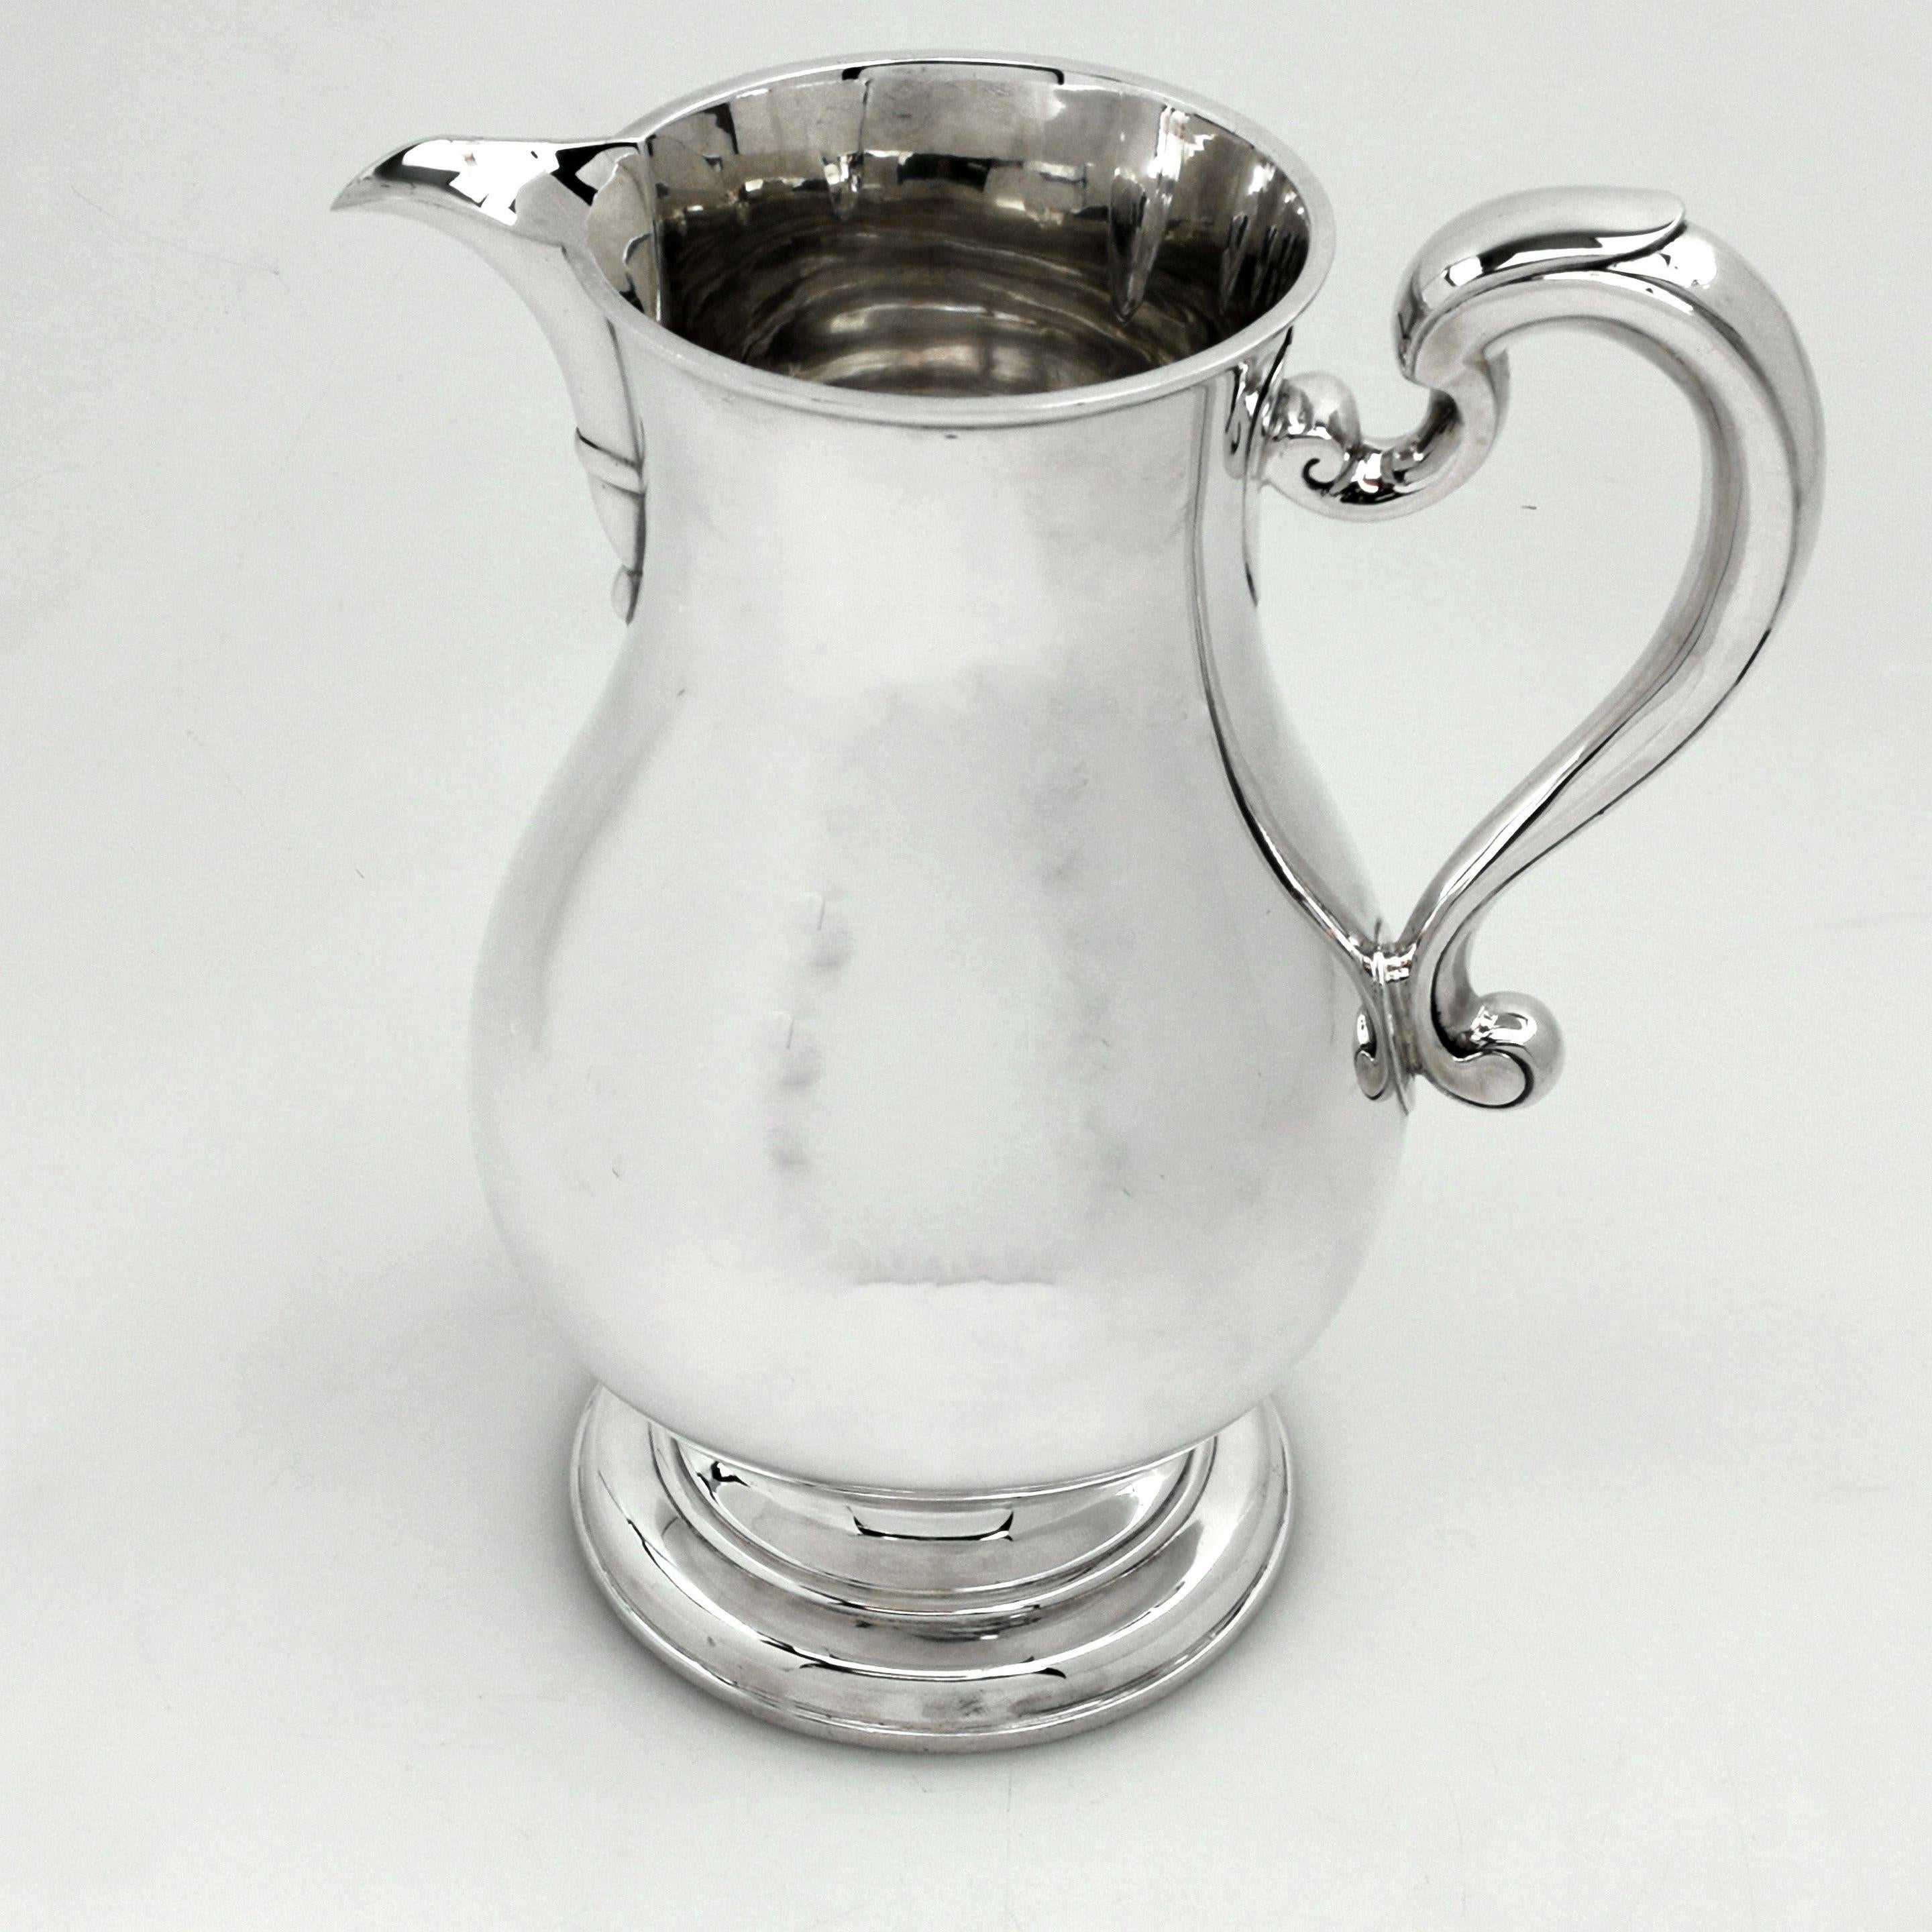 A classic solid silver jug in a plain, highly polished baluster form. This Georgian style beer jug stands on a spread pedestal foot and has a scroll handle. This Jug is of a large size, suitable for beer, water or cocktails.
 
 Made in London in